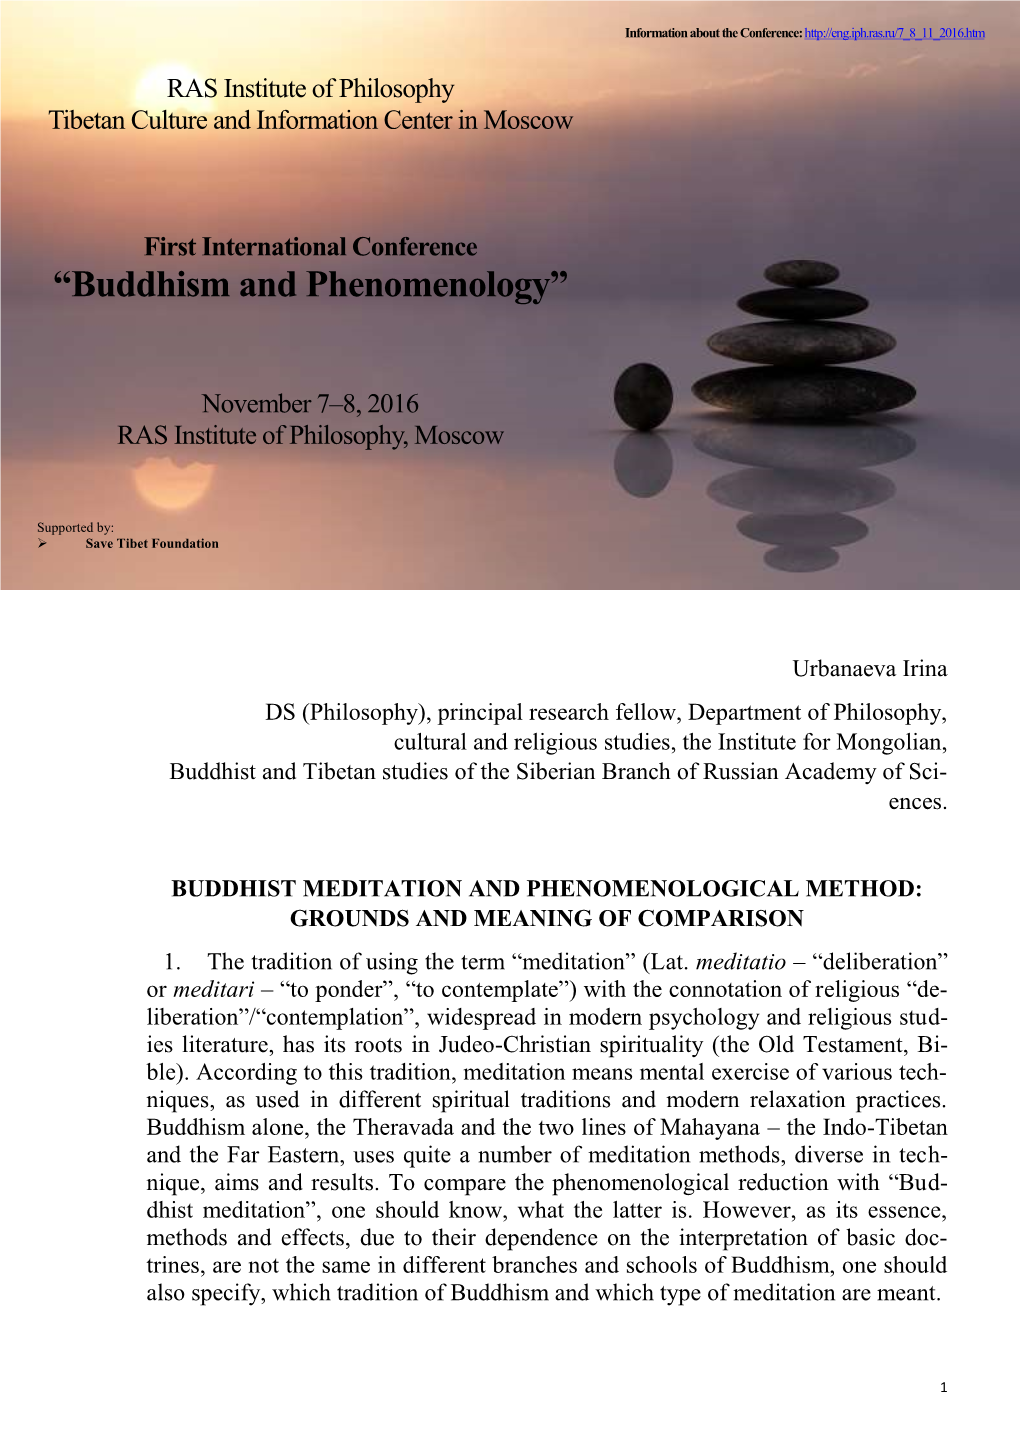 Buddhist Meditation and Phenomenological Method: Grounds and Meaning of Comparison 1